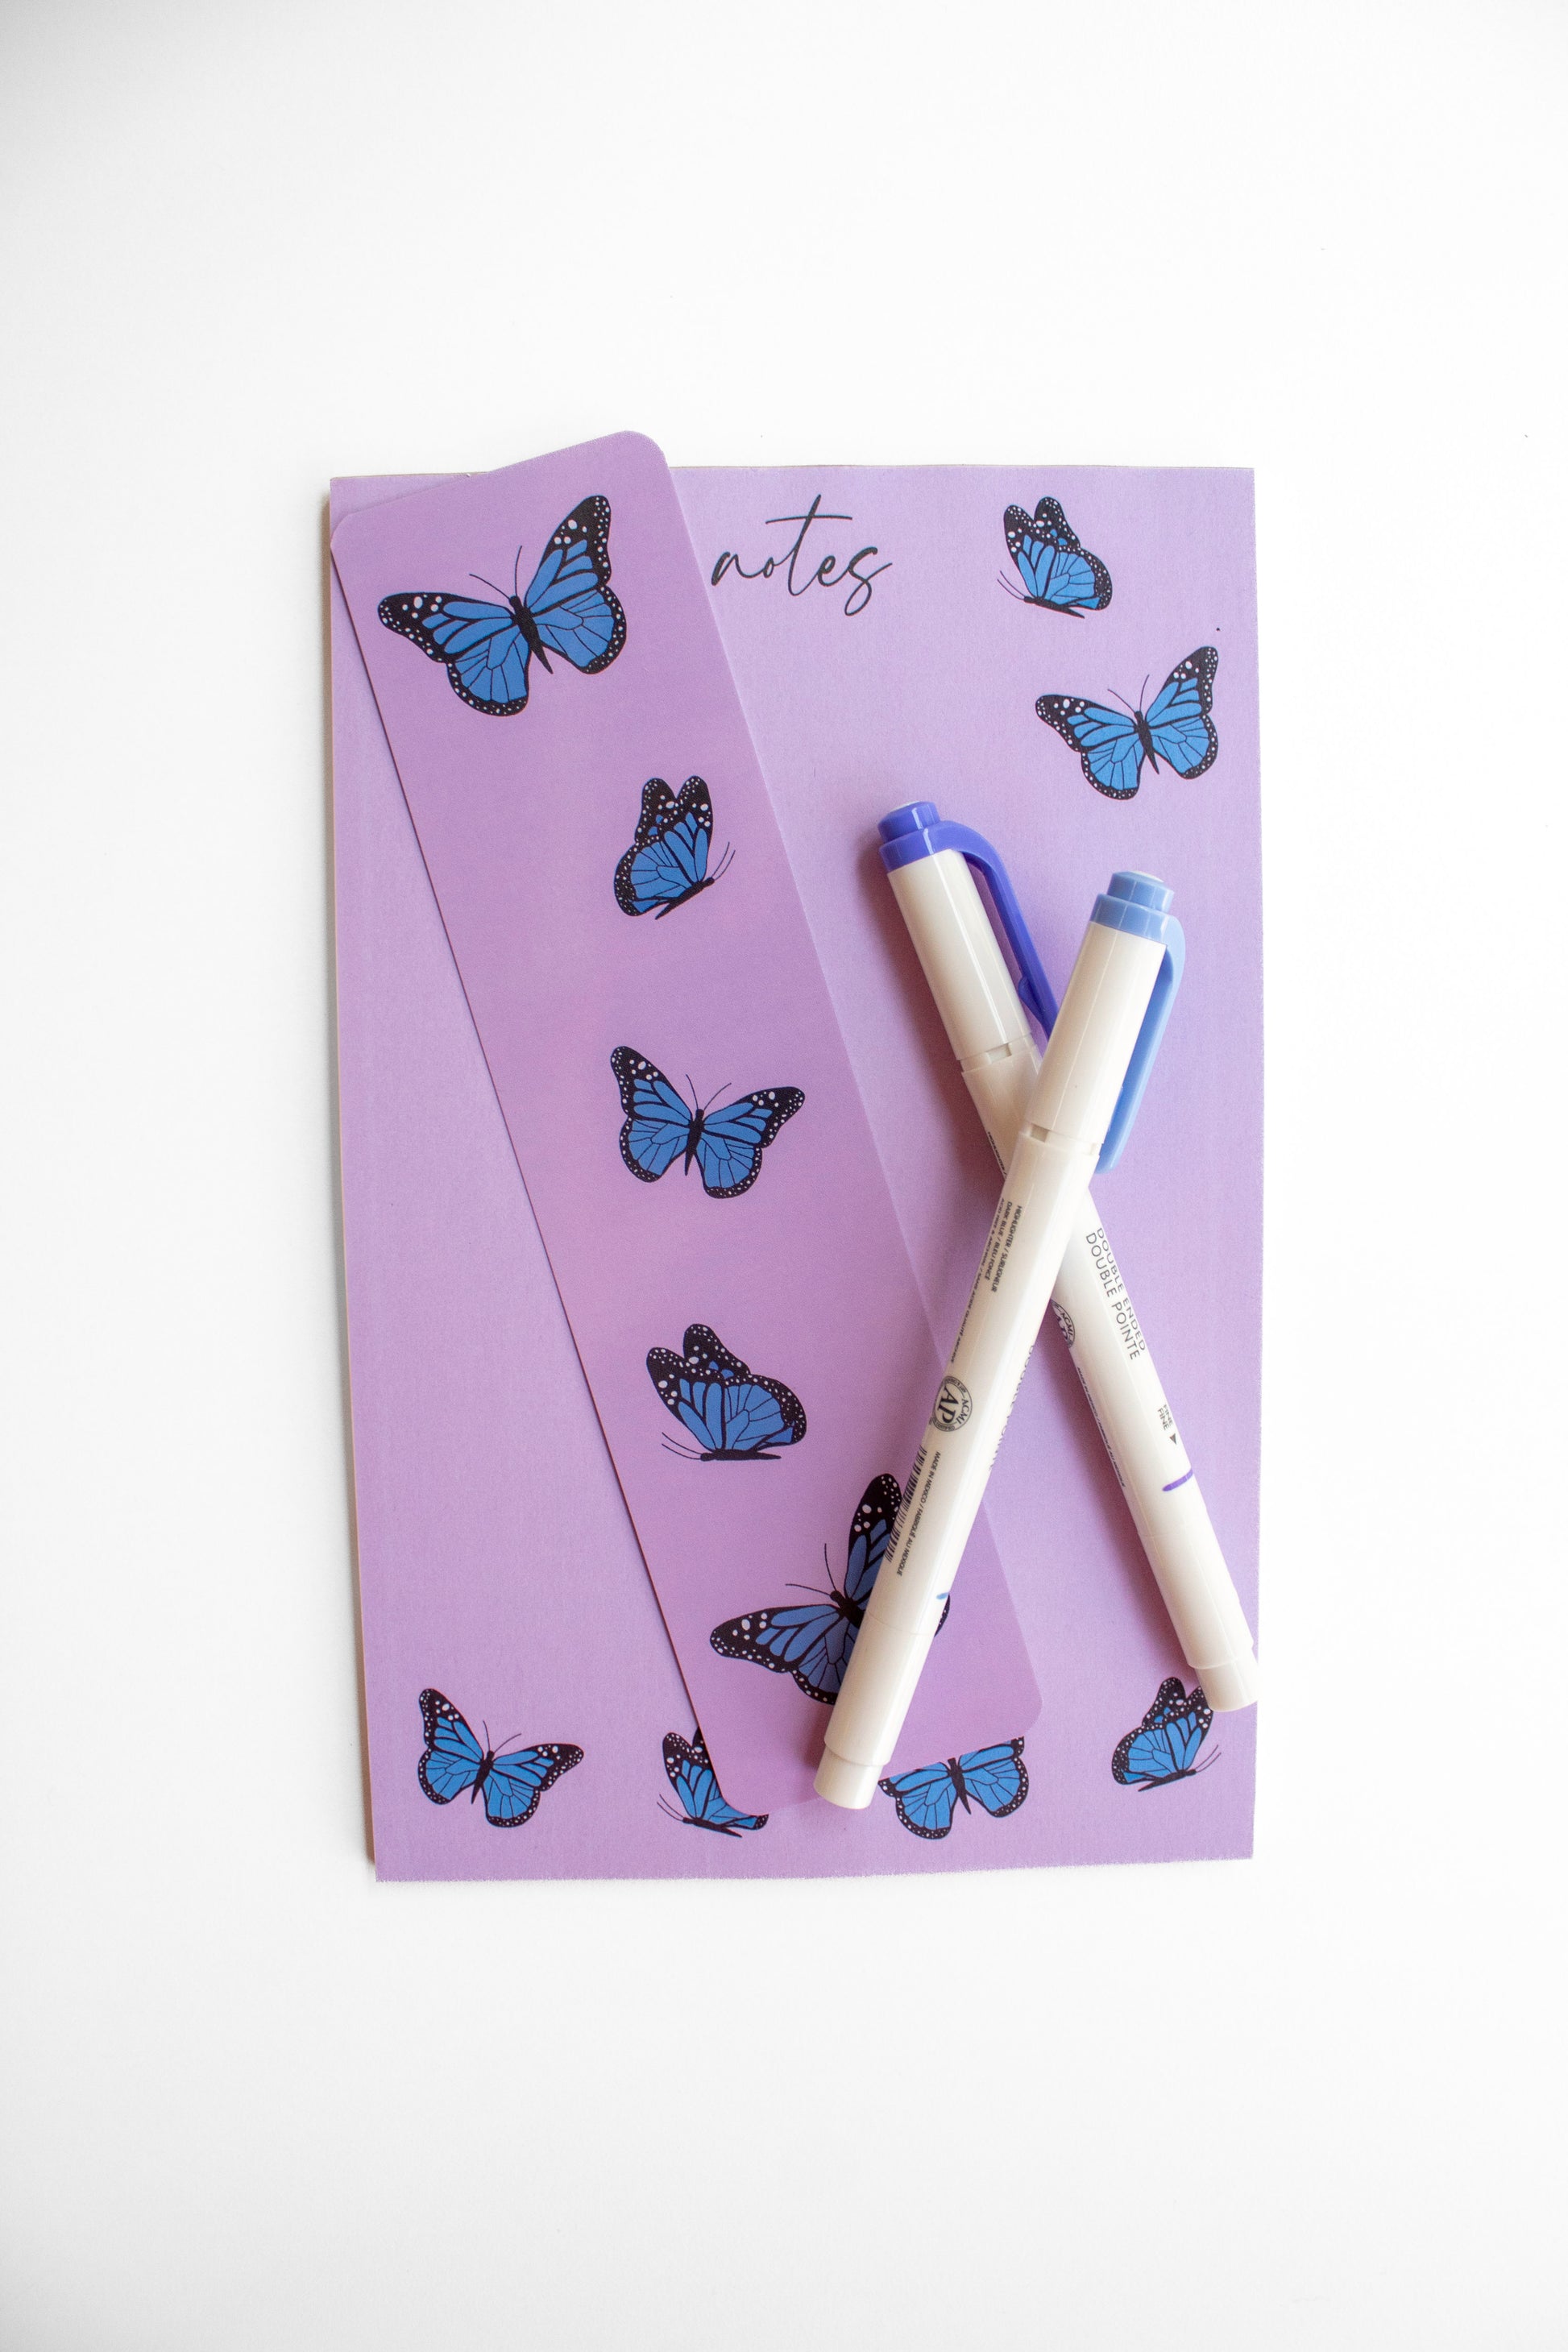 Linda Tong Planners  Pre-made Bullet Journals & Illustrated Planners –  Linda Tong Planners LLC